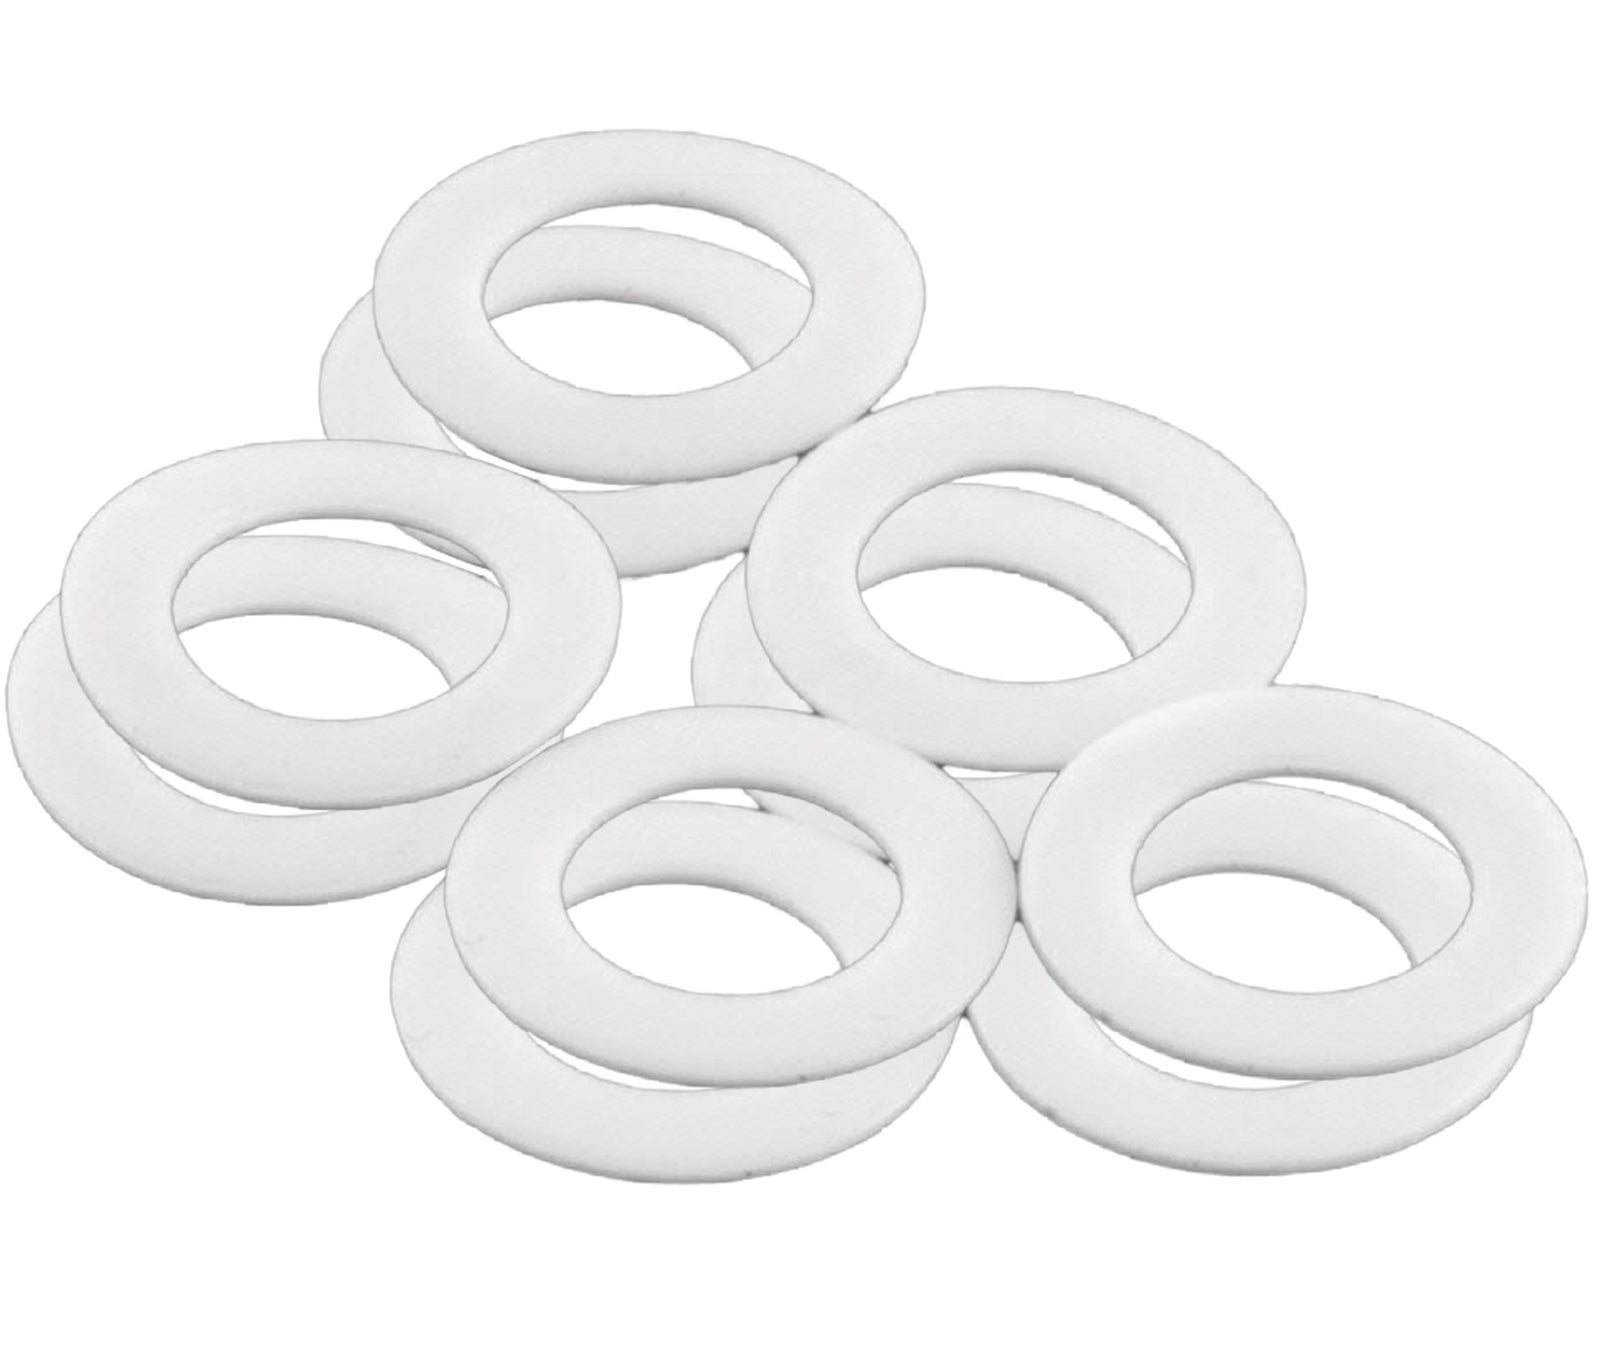 Proflow PTFE Washers -06AN 10 Pack PFE176-06